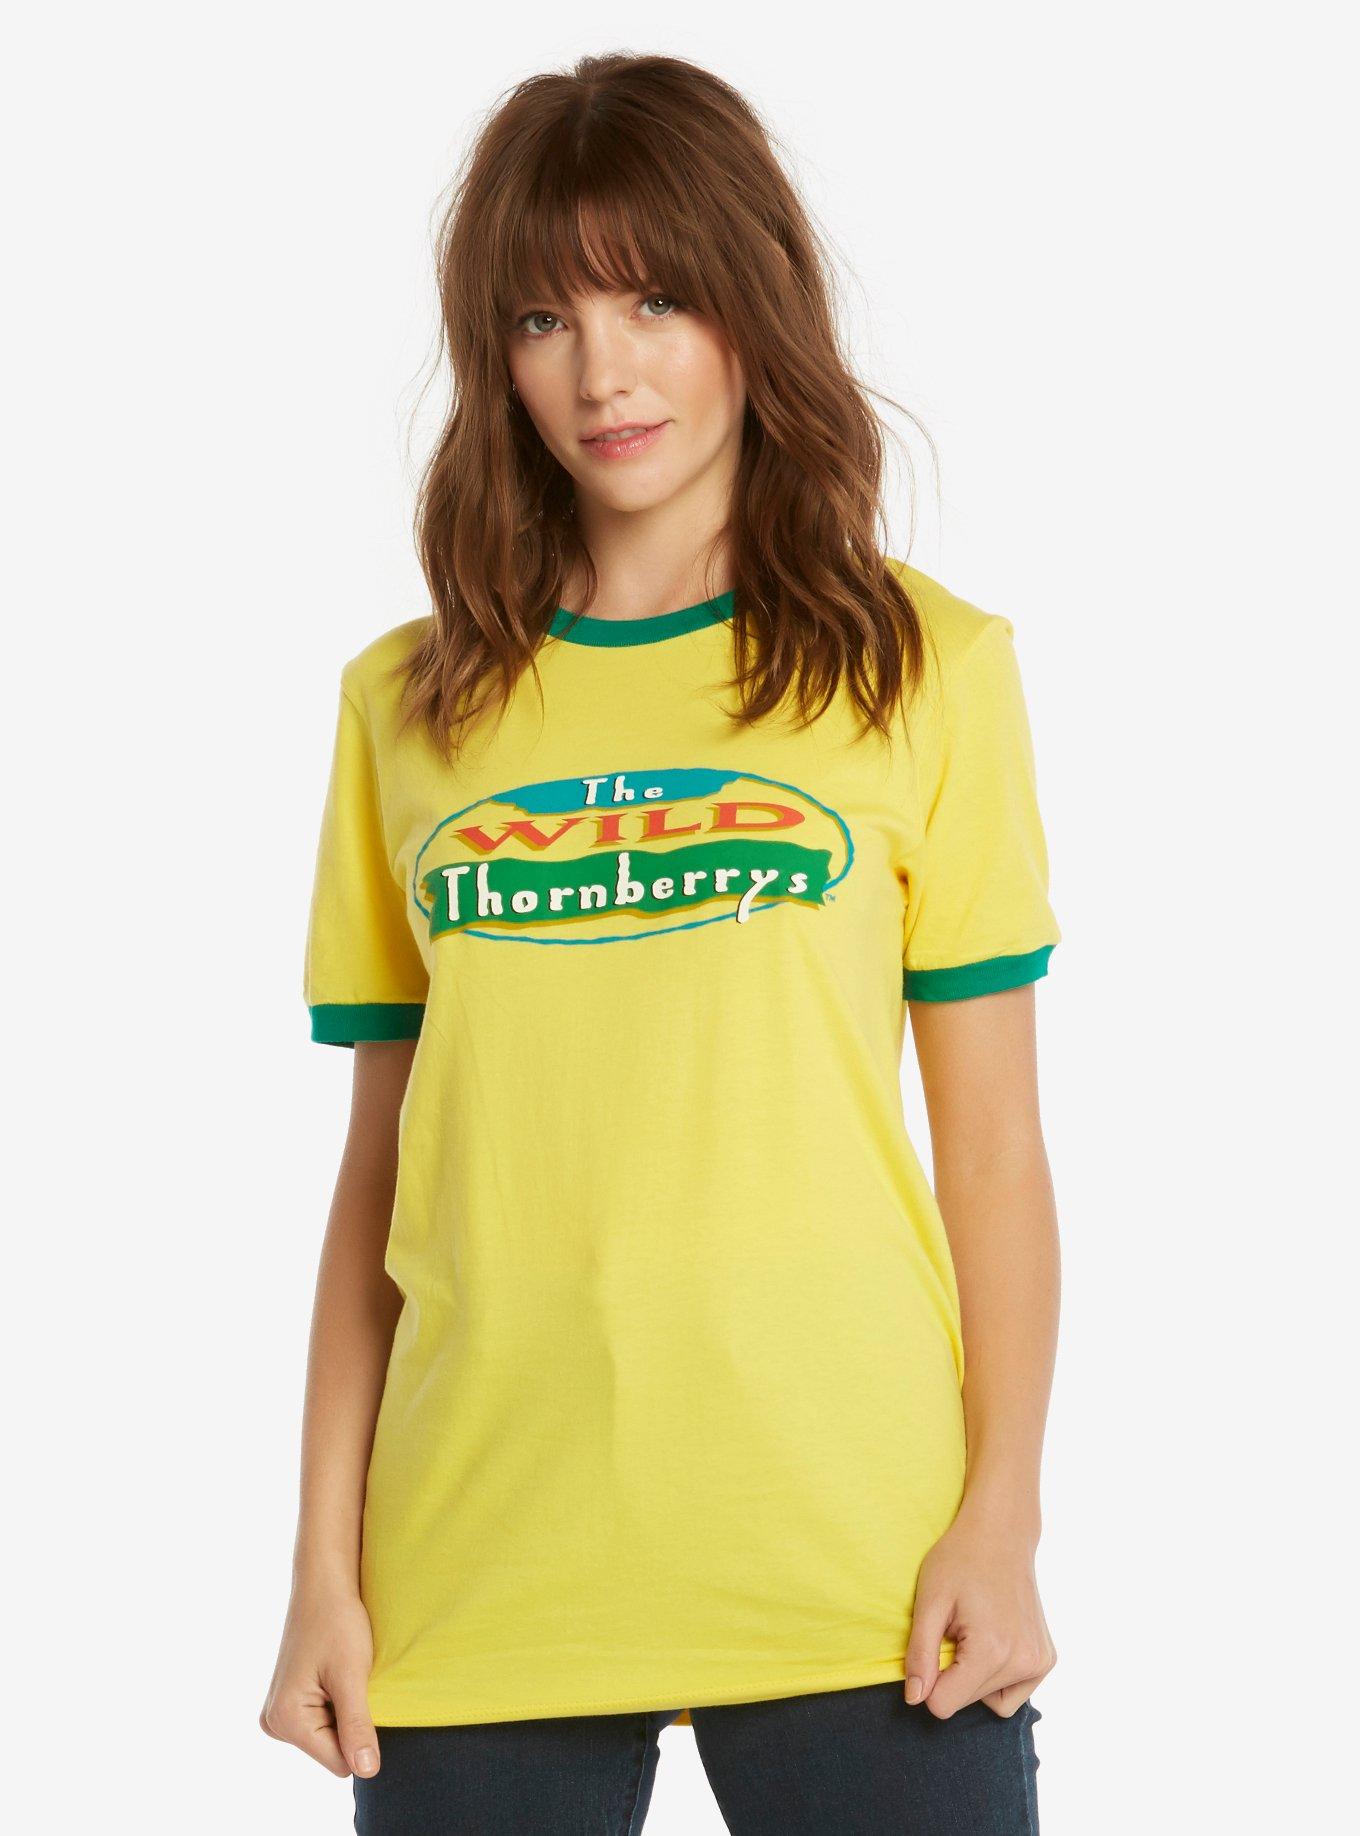 The Wild Thornberrys Womens Ringer Tee - BoxLunch Exclusive | BoxLunch